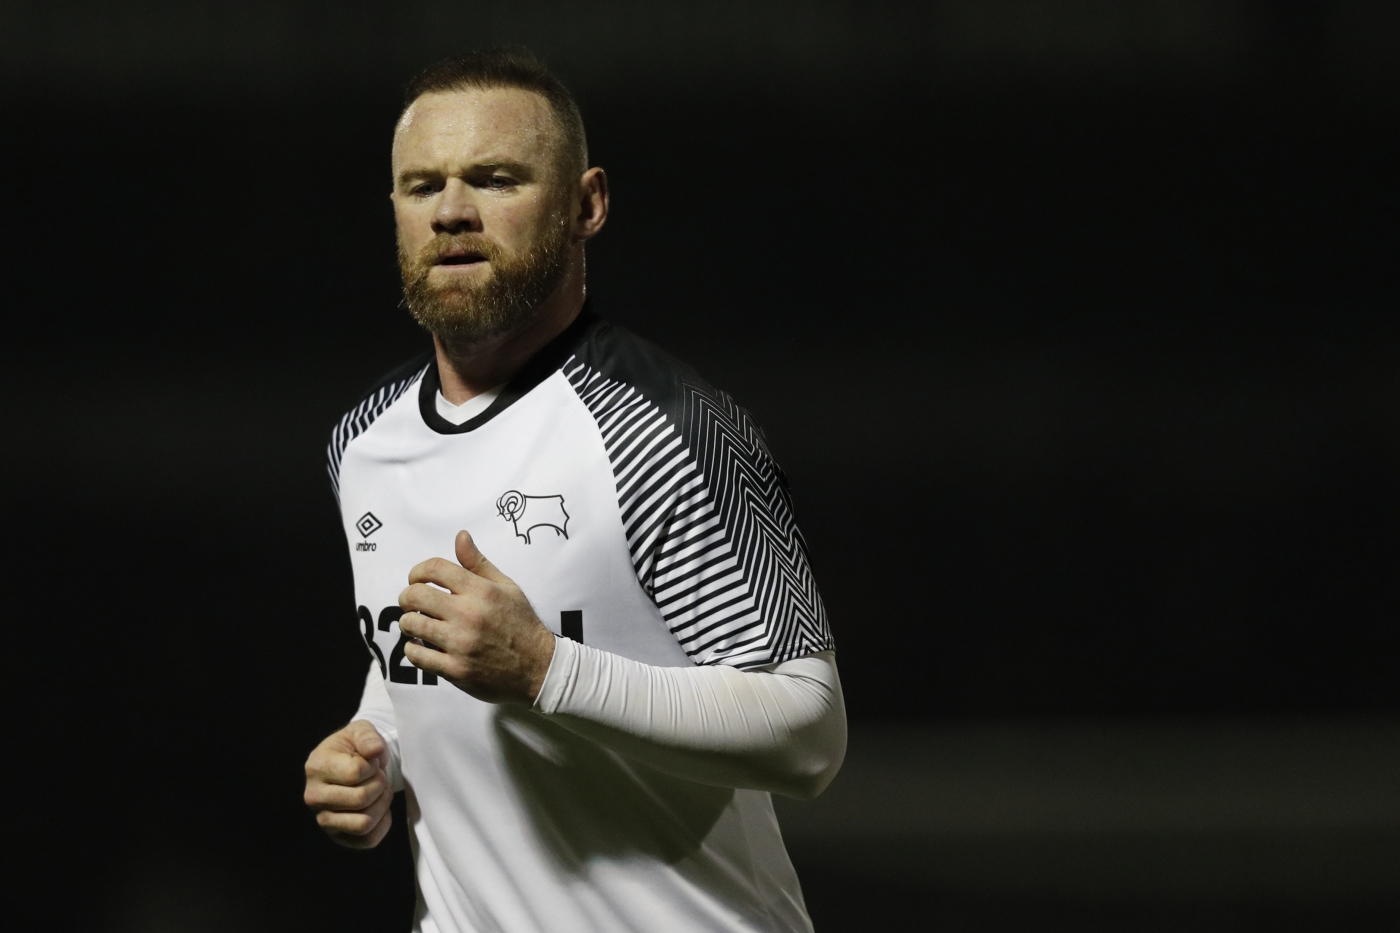 Wayne Rooney joined Derby County in January 2020